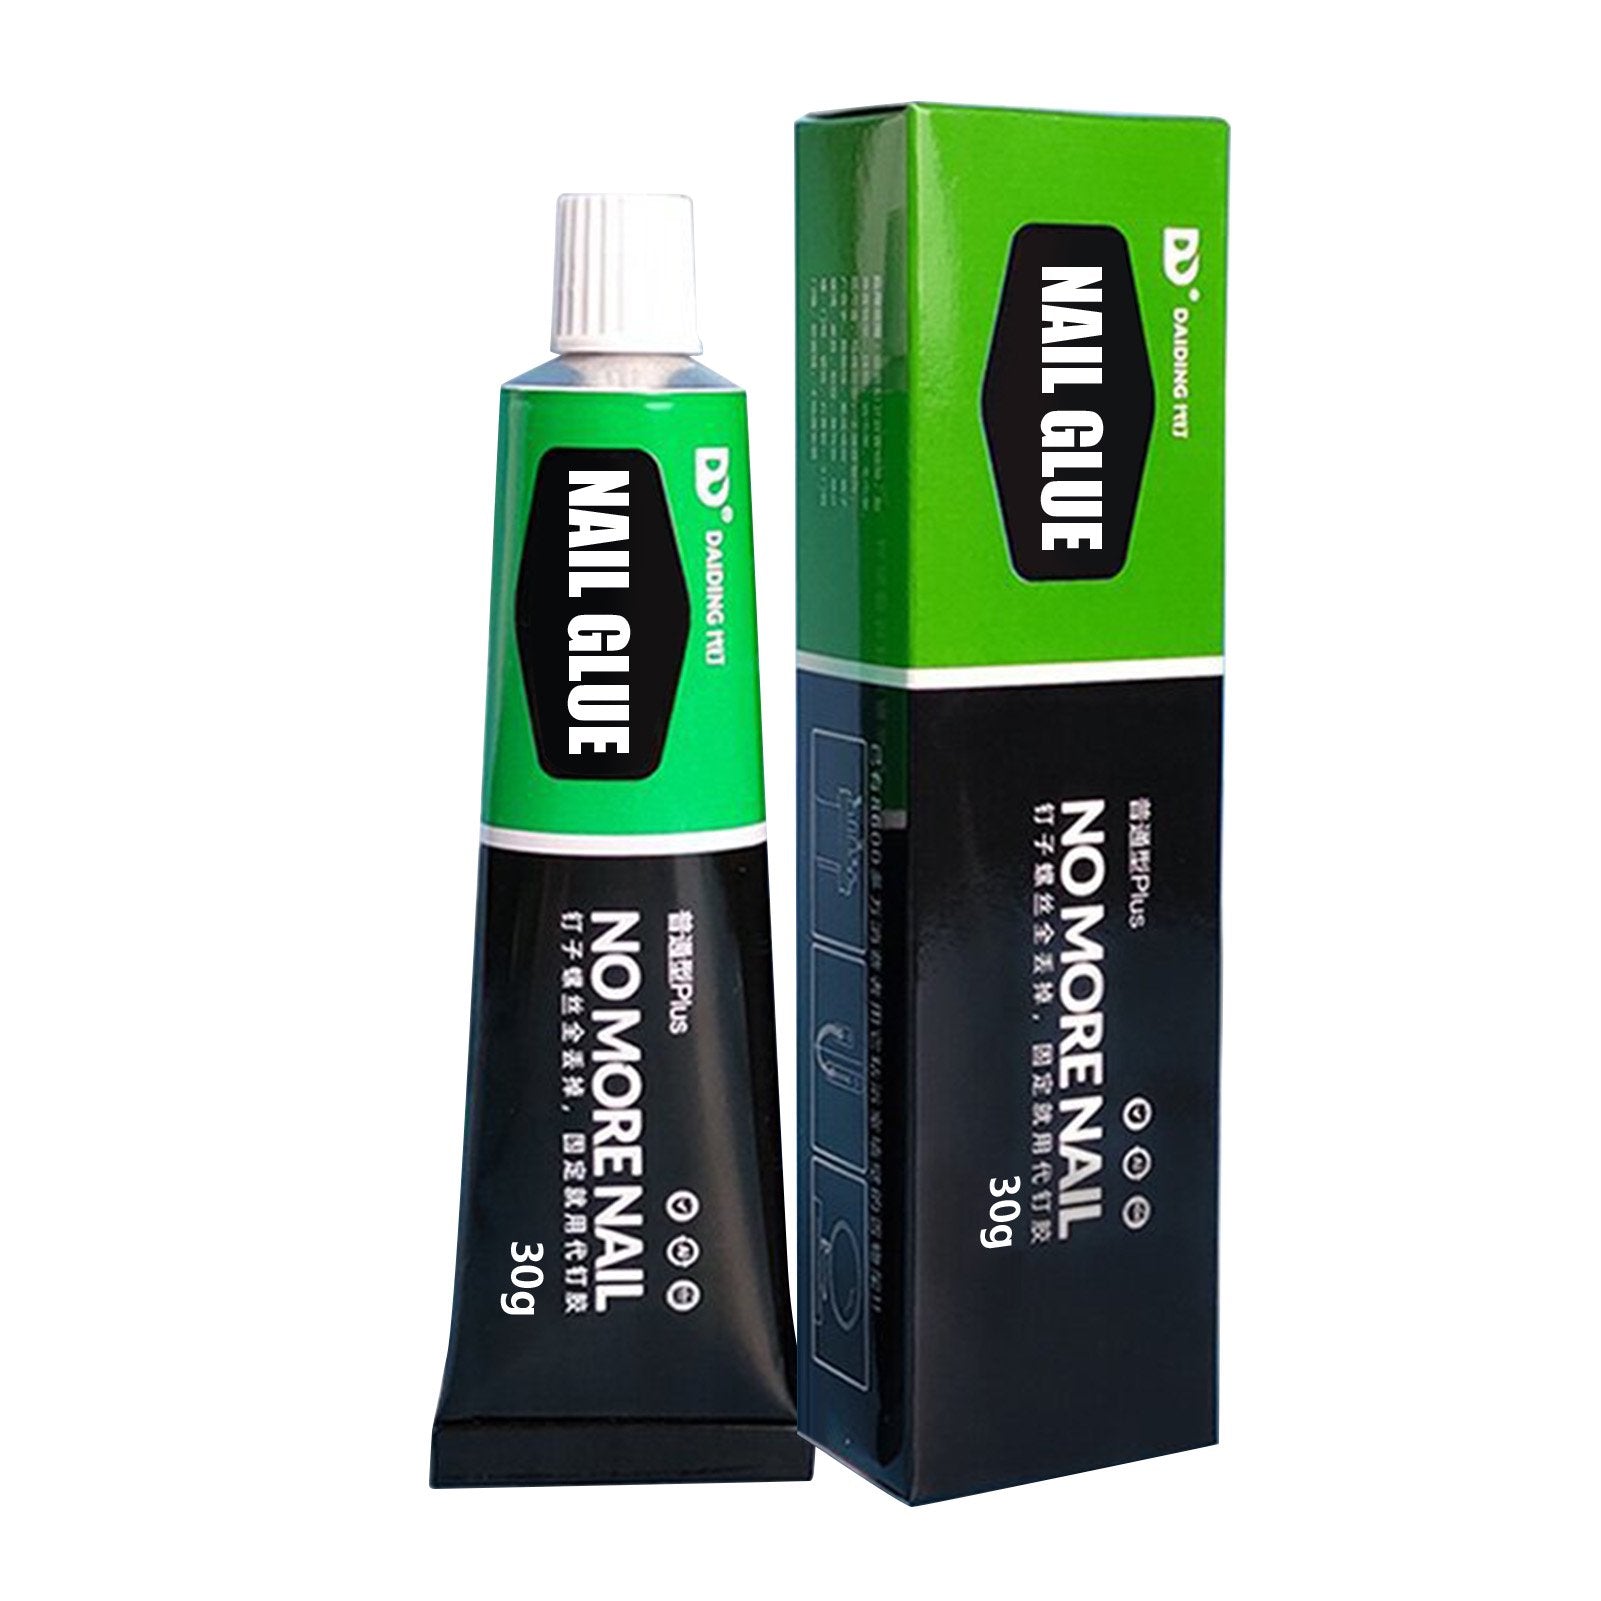 All-purpose Glue Quick Drying Glue Strong Adhesive Sealant